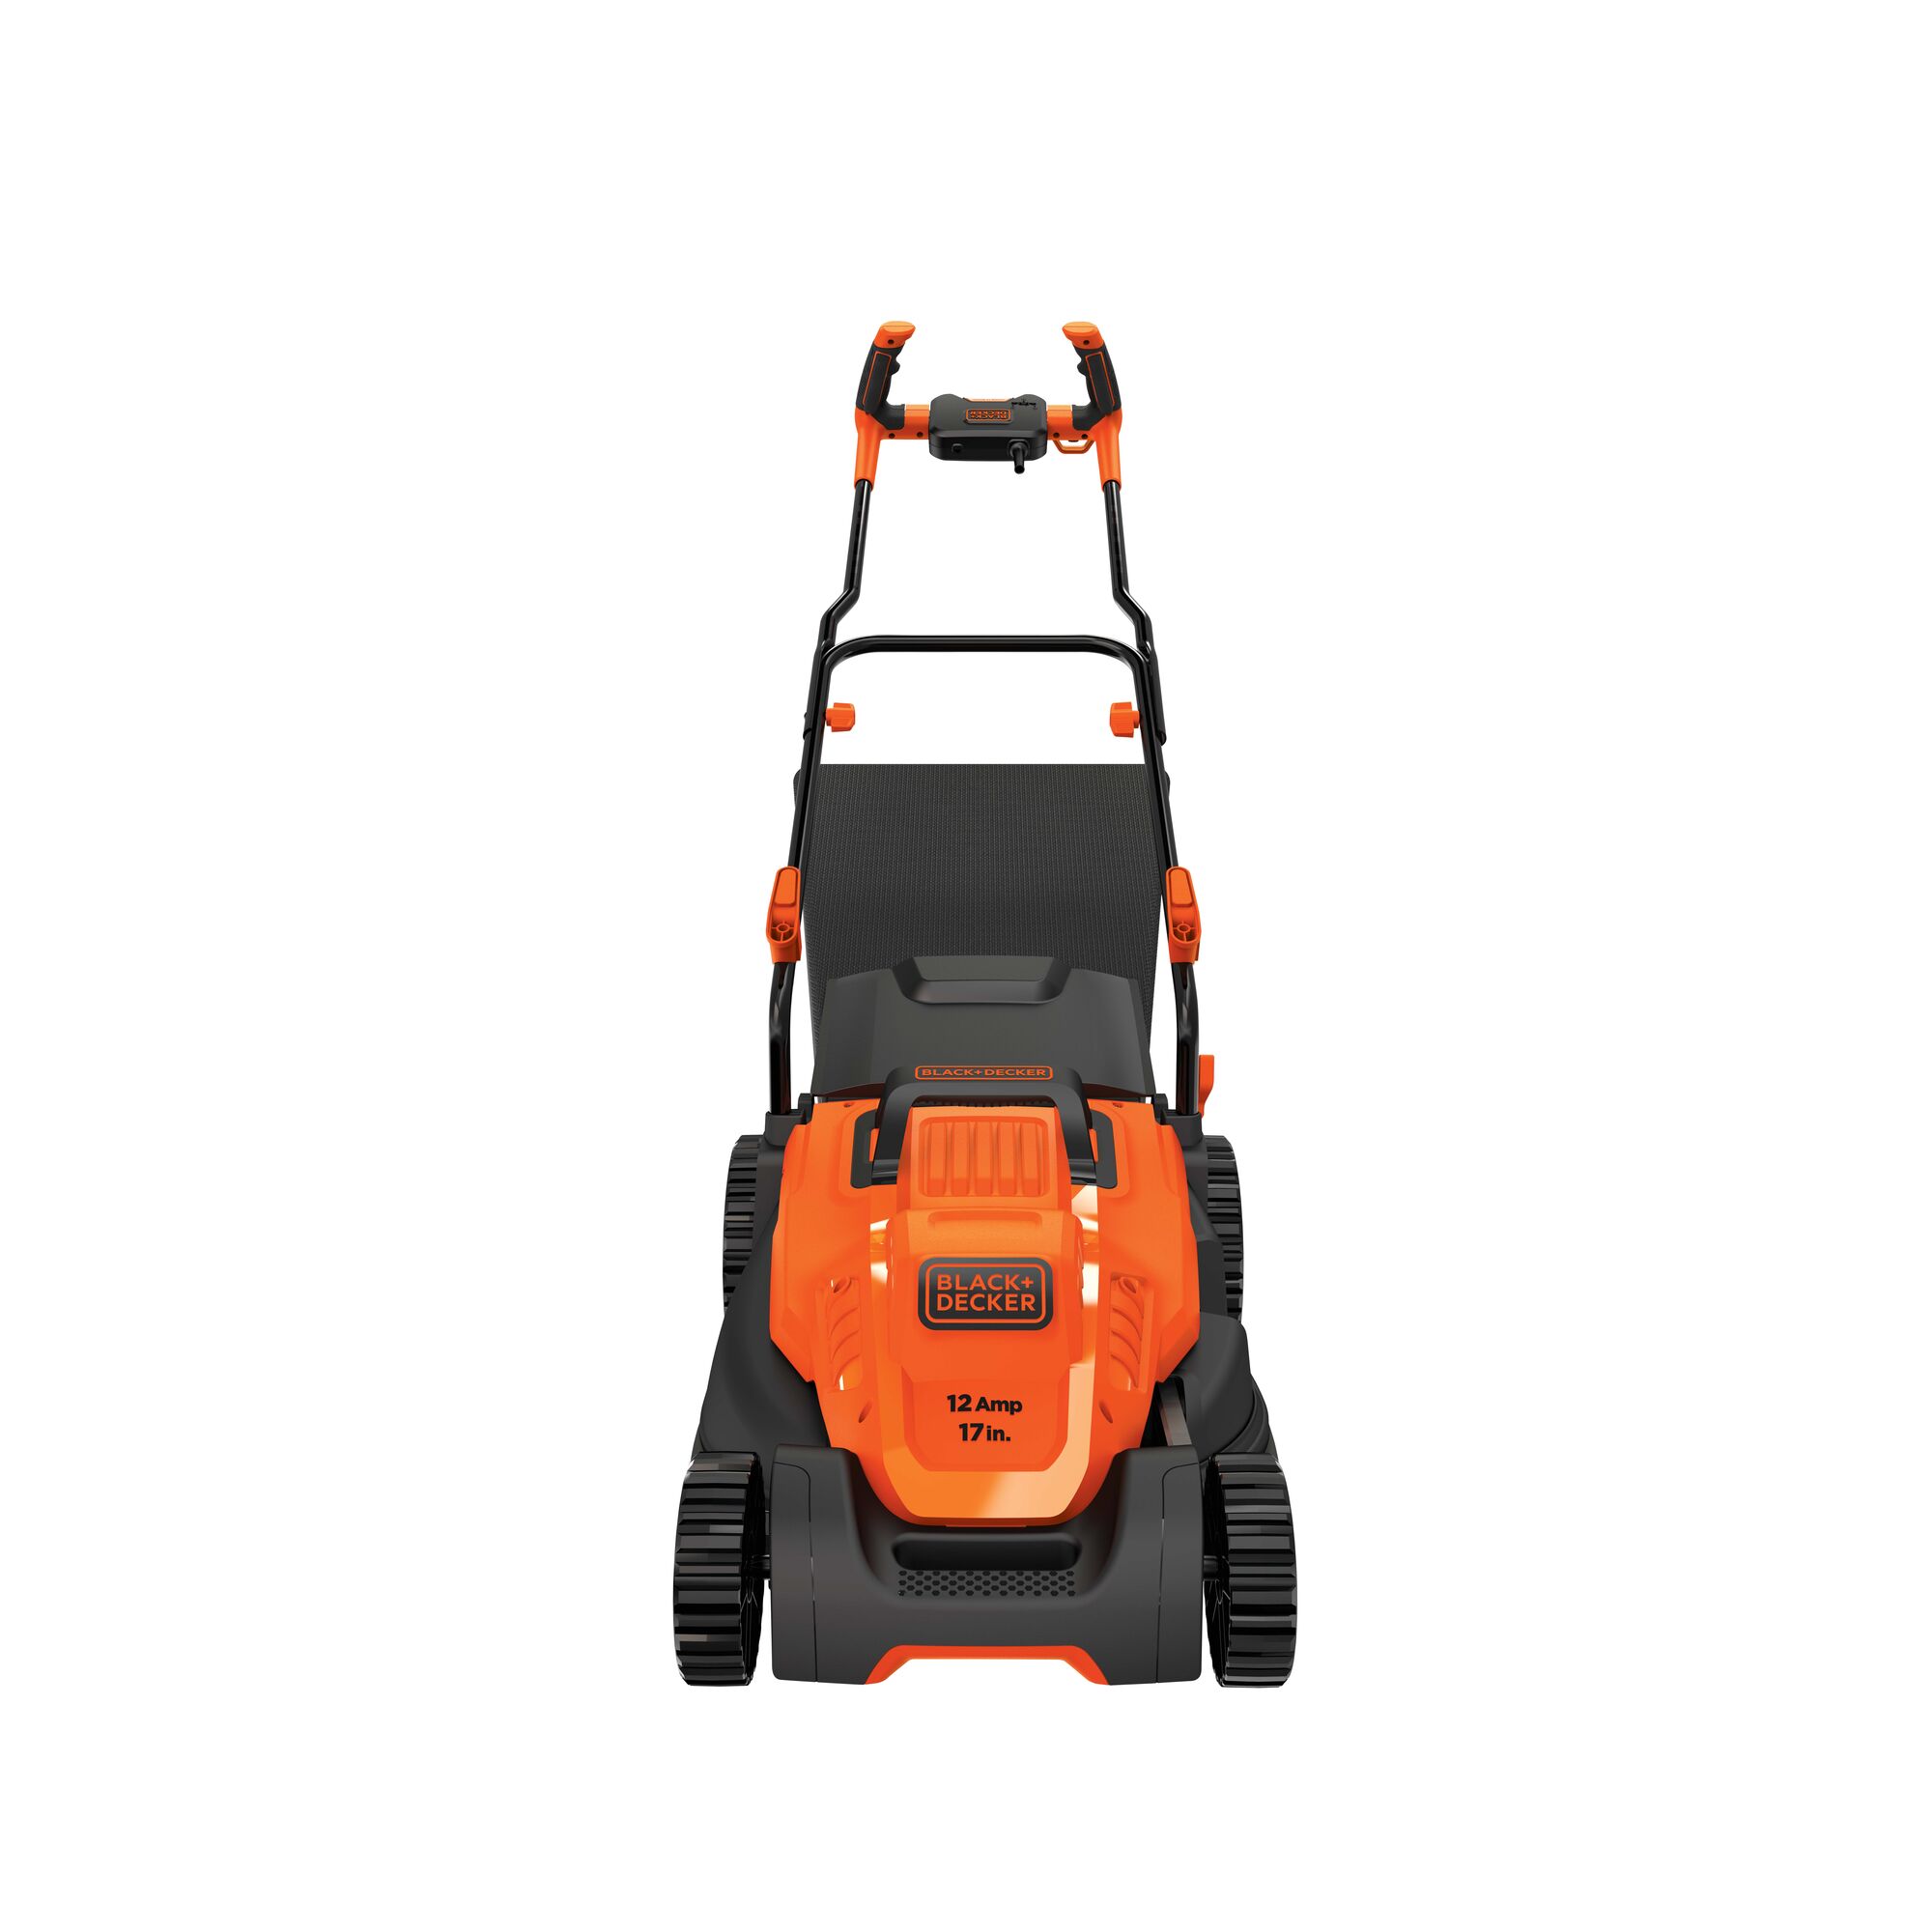 Front facing view of Black and decker 12 Amp 17 inch electric lawn mower with comfort grip handle.